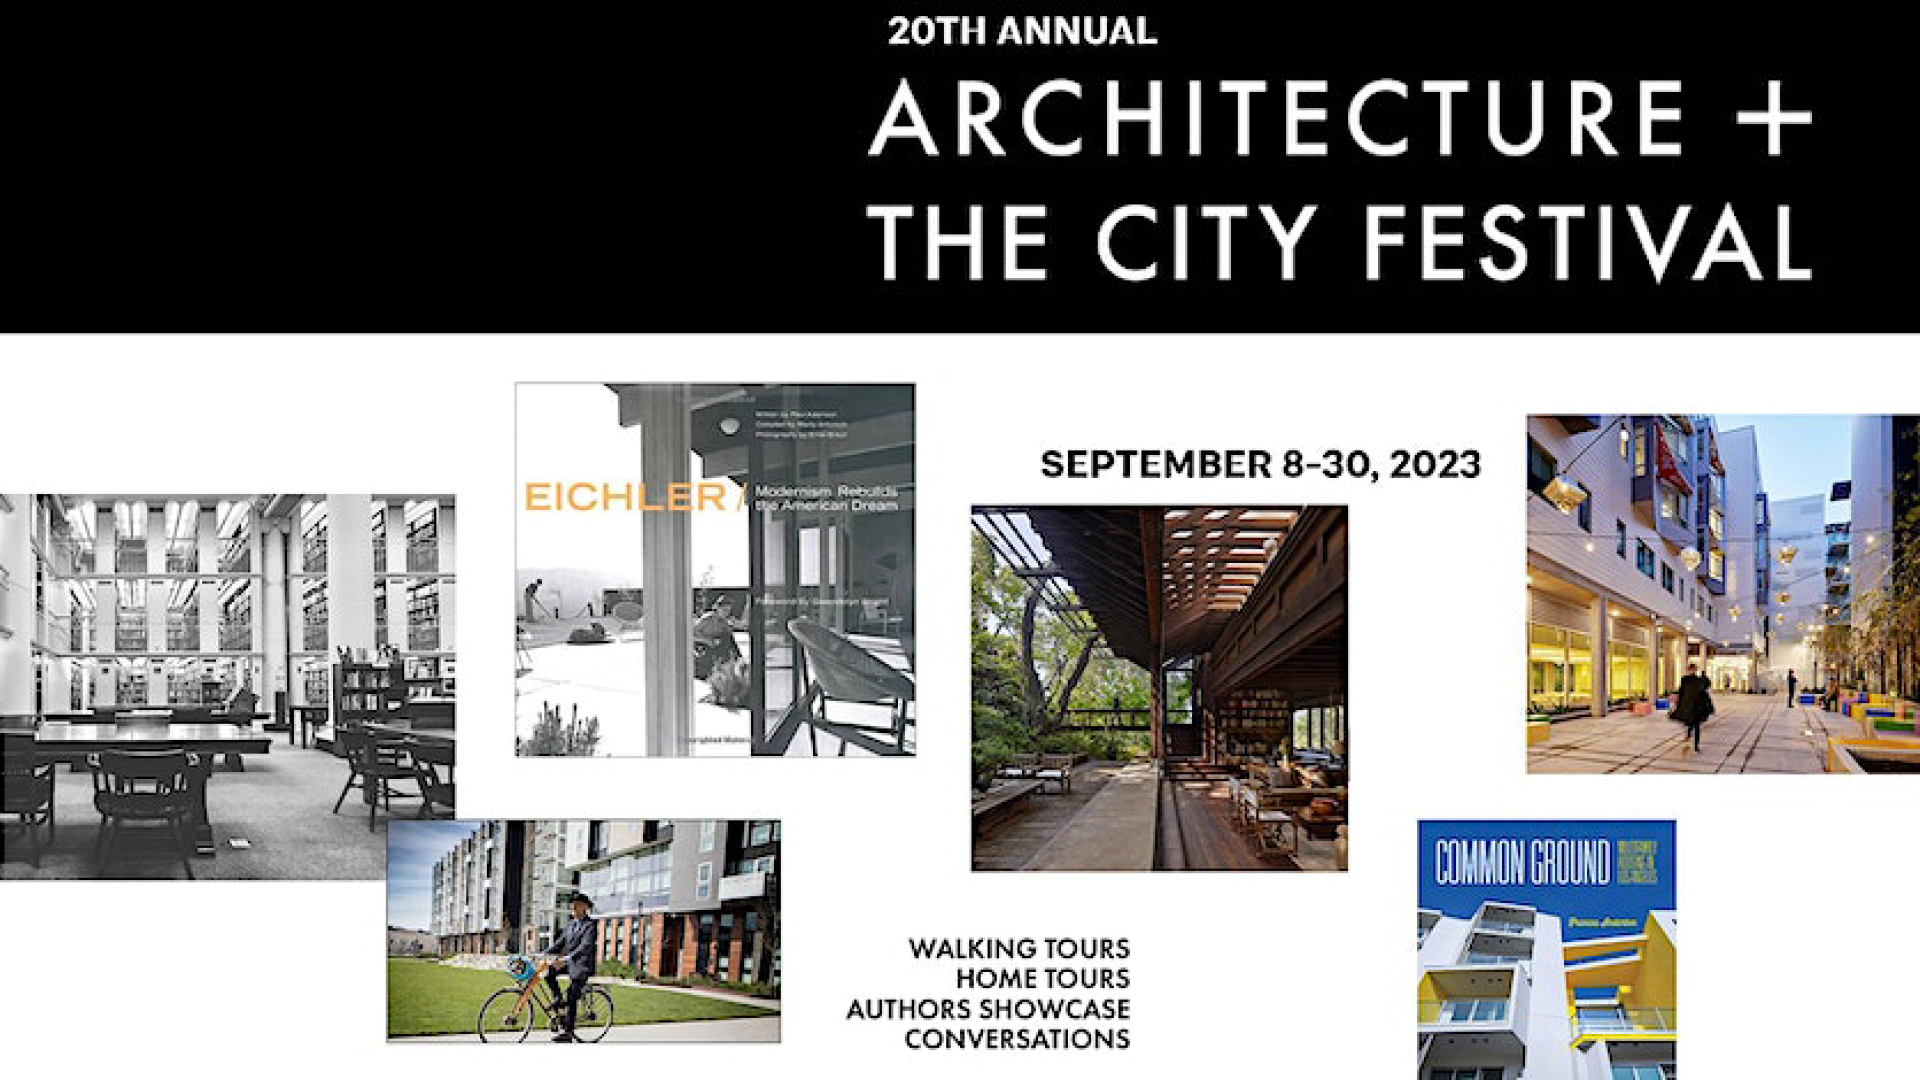 Flyer for the 20th Annual Architecture + The City Festival in San Francisco from September 9-30.